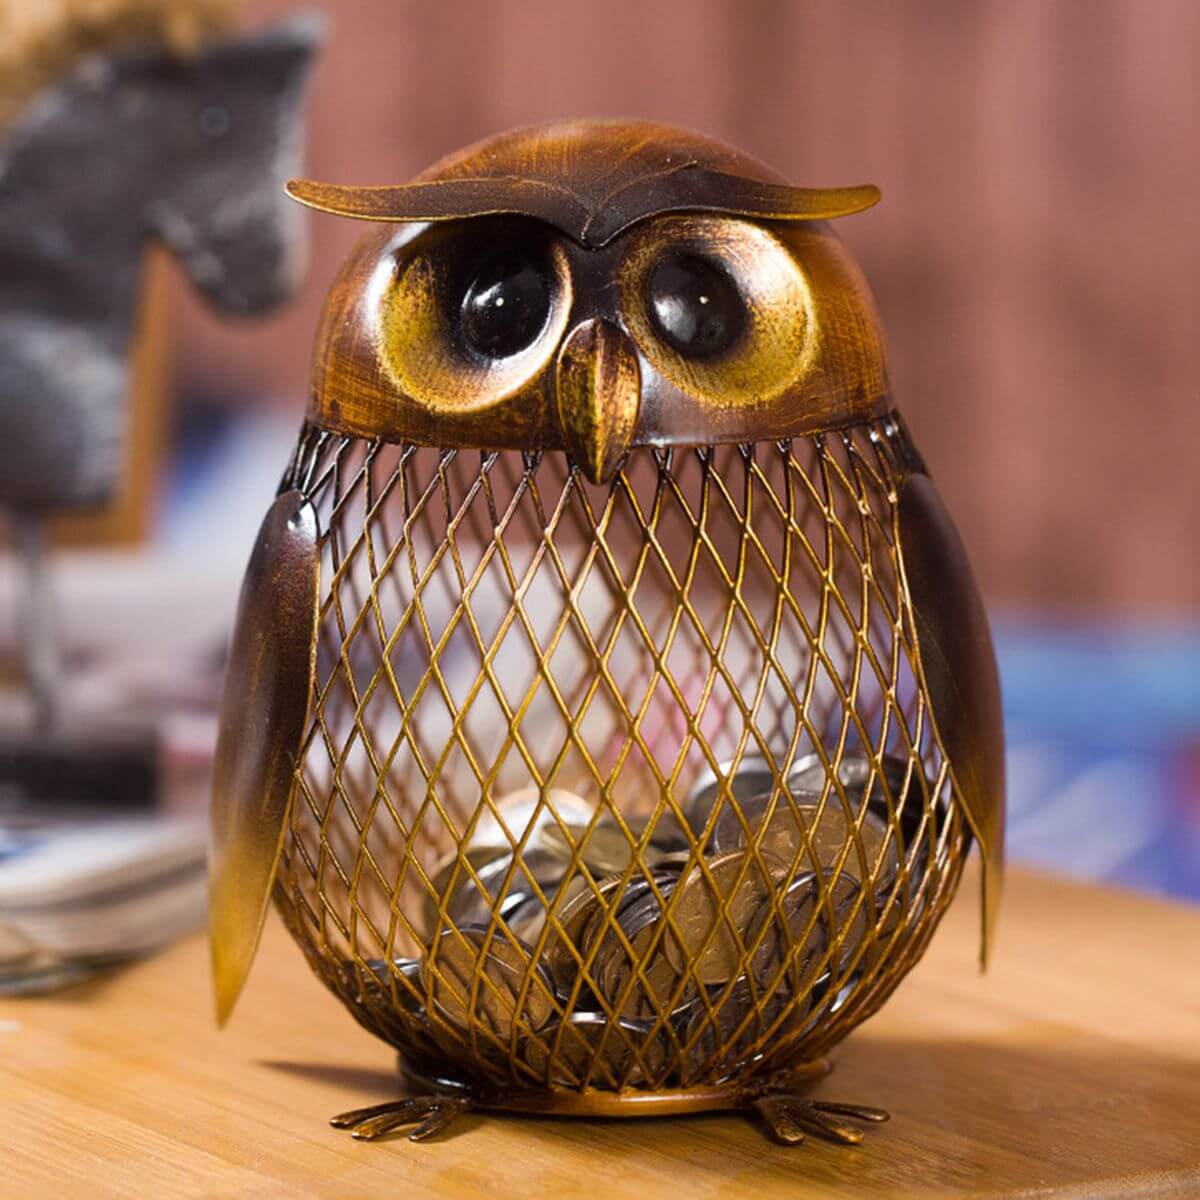 Bank Owl Figurine Money Box - Shop For Gamers